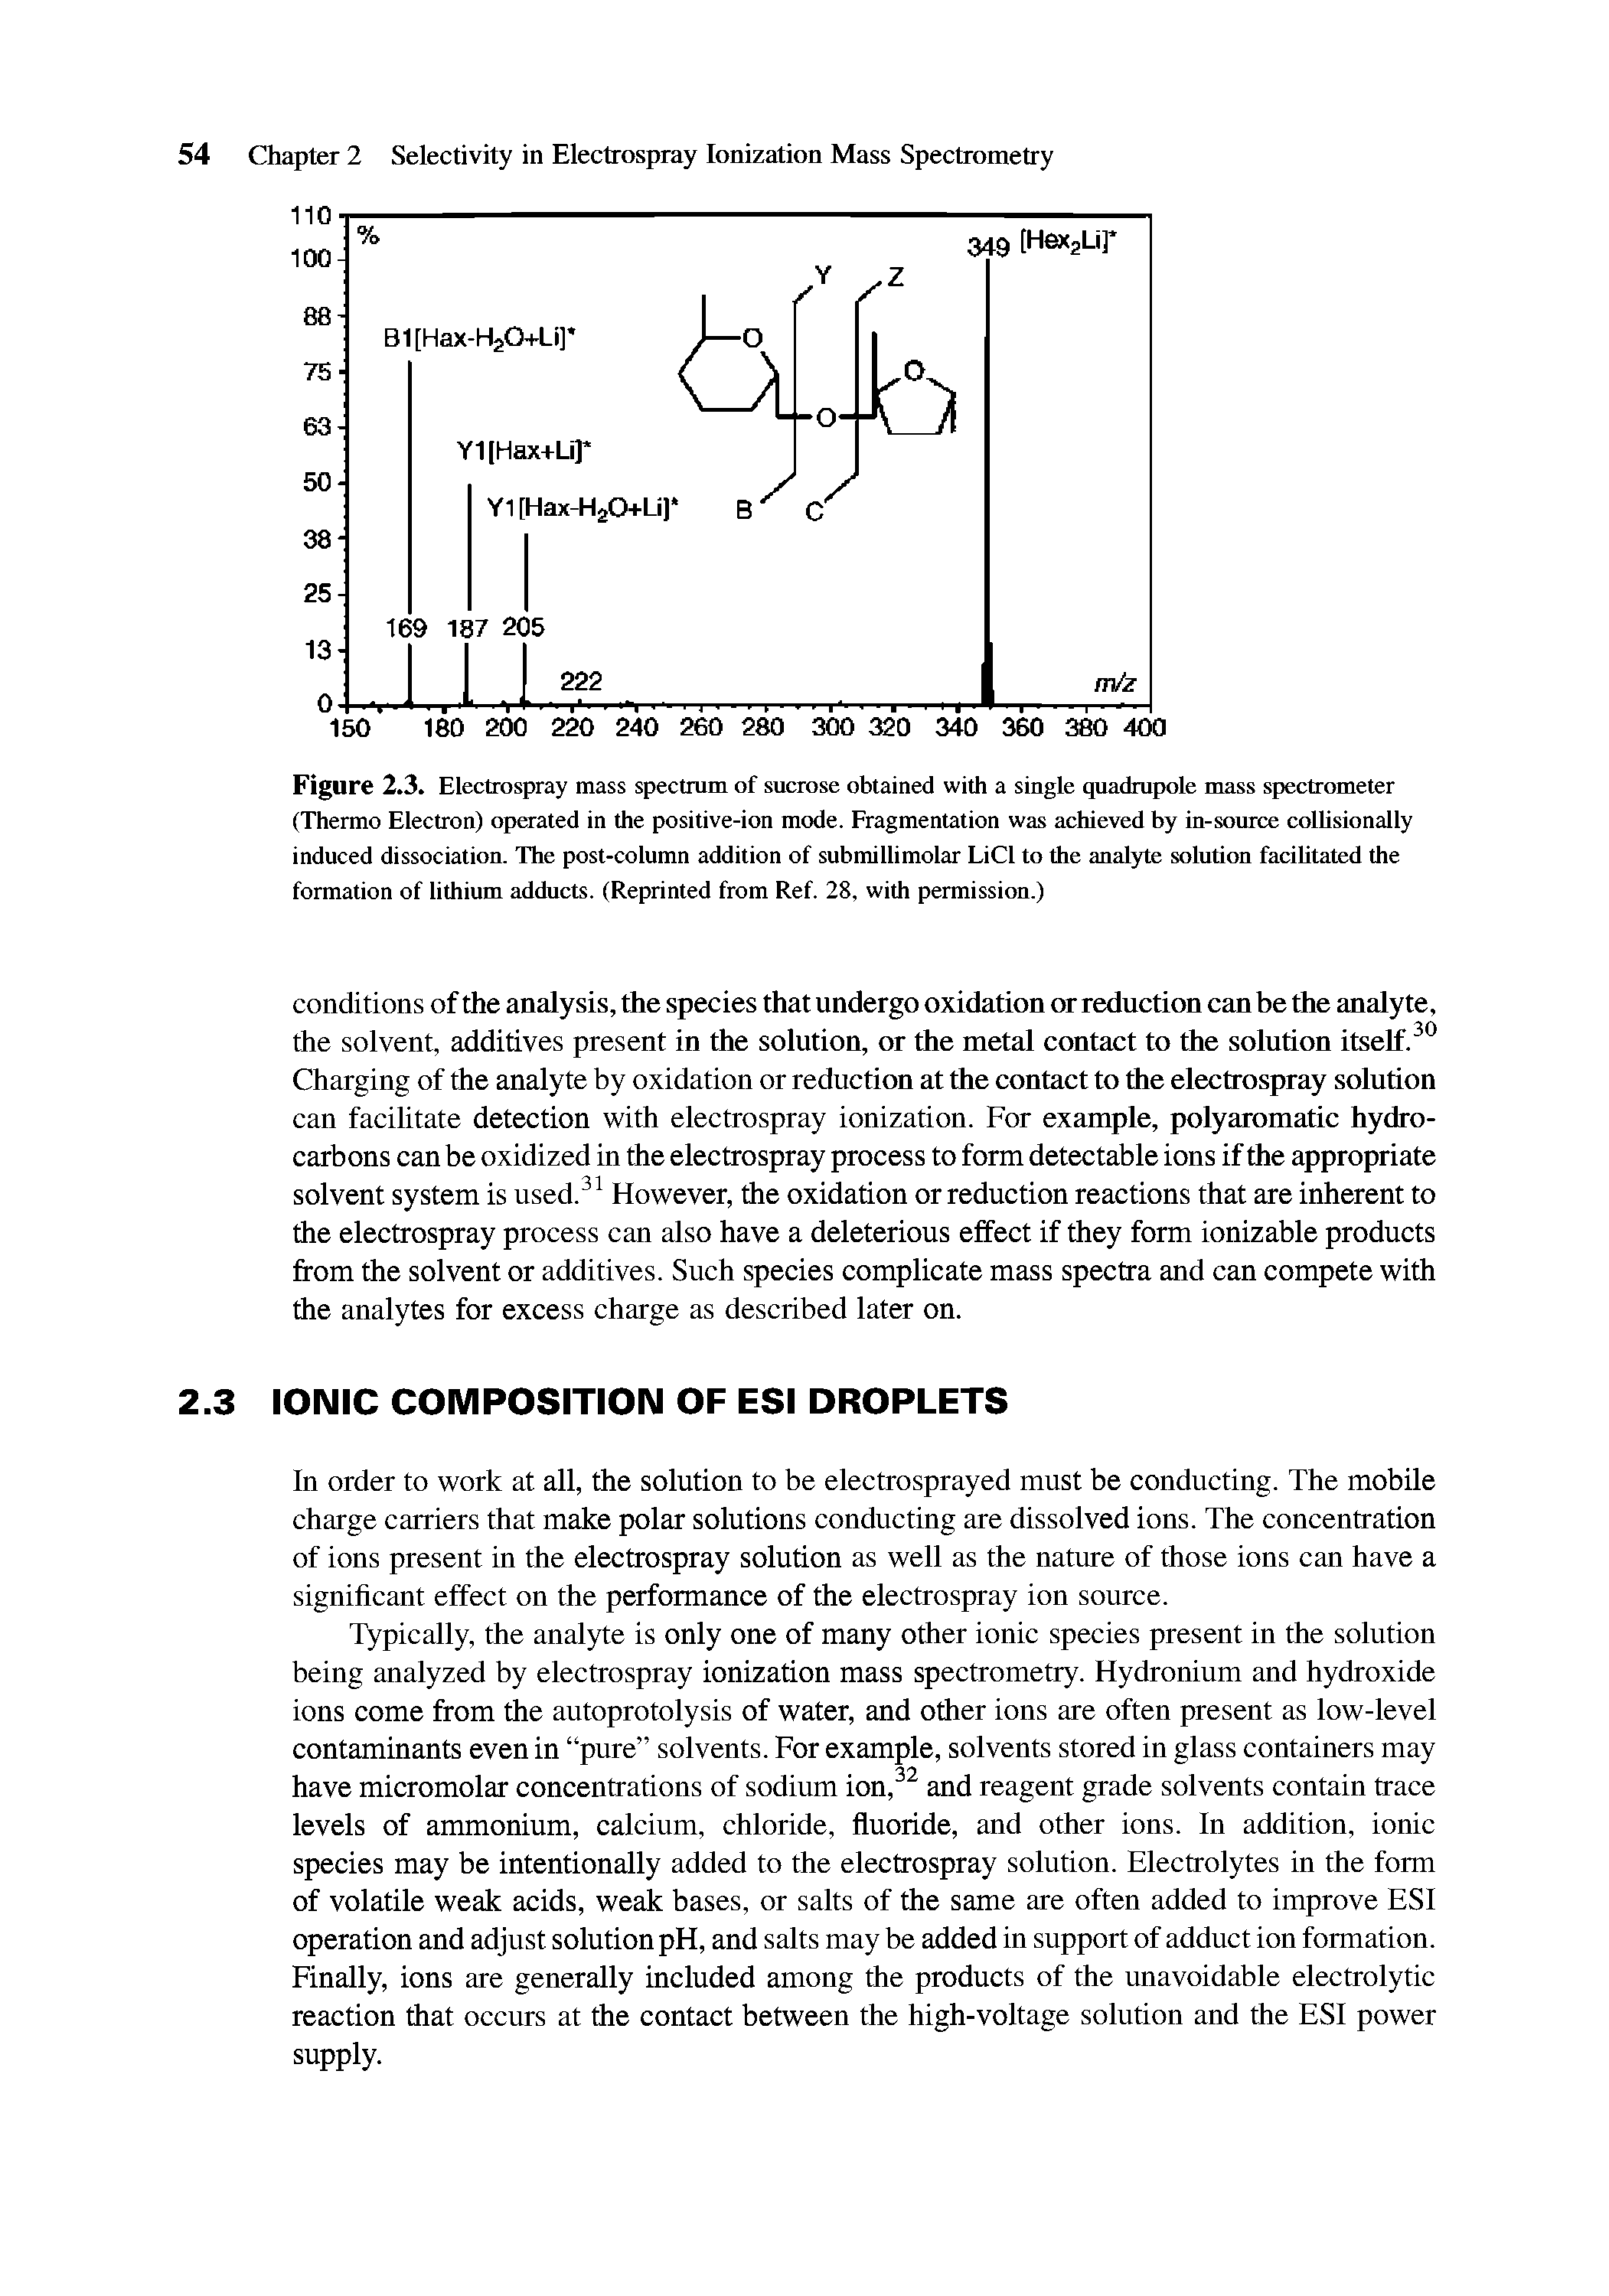 Figure 2.3. Electrospray mass spectrum of sucrose obtained with a single quadrupole mass spectrometer (Thermo Electron) operated in the positive-ion mode. Fragmentation was achieved by in-source collisionally induced dissociation. The post-column addition of submillimolar LiCl to the analyte solution facilitated the formation of lithium adducts. (Reprinted from Ref. 28, with permission.)...